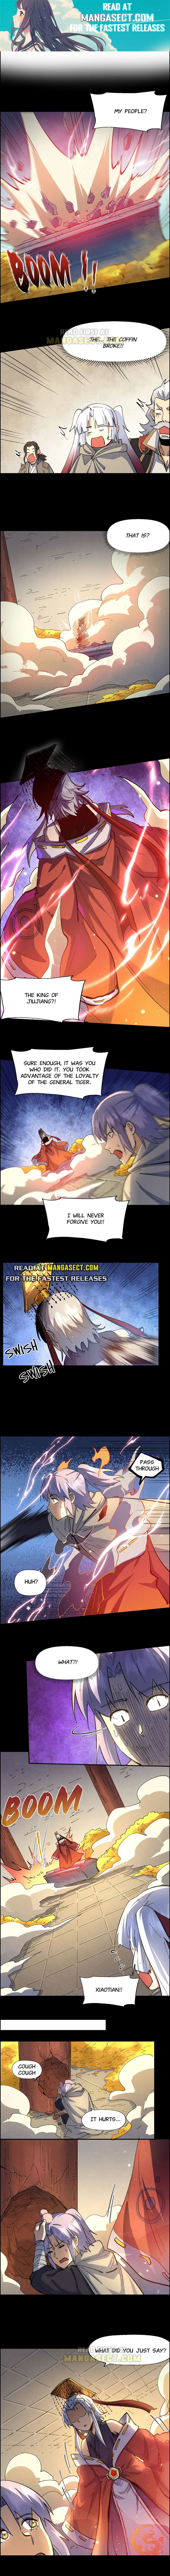 The Strongest Protagonist of All Time! Chapter 102 page 1 - MangaWeebs.in